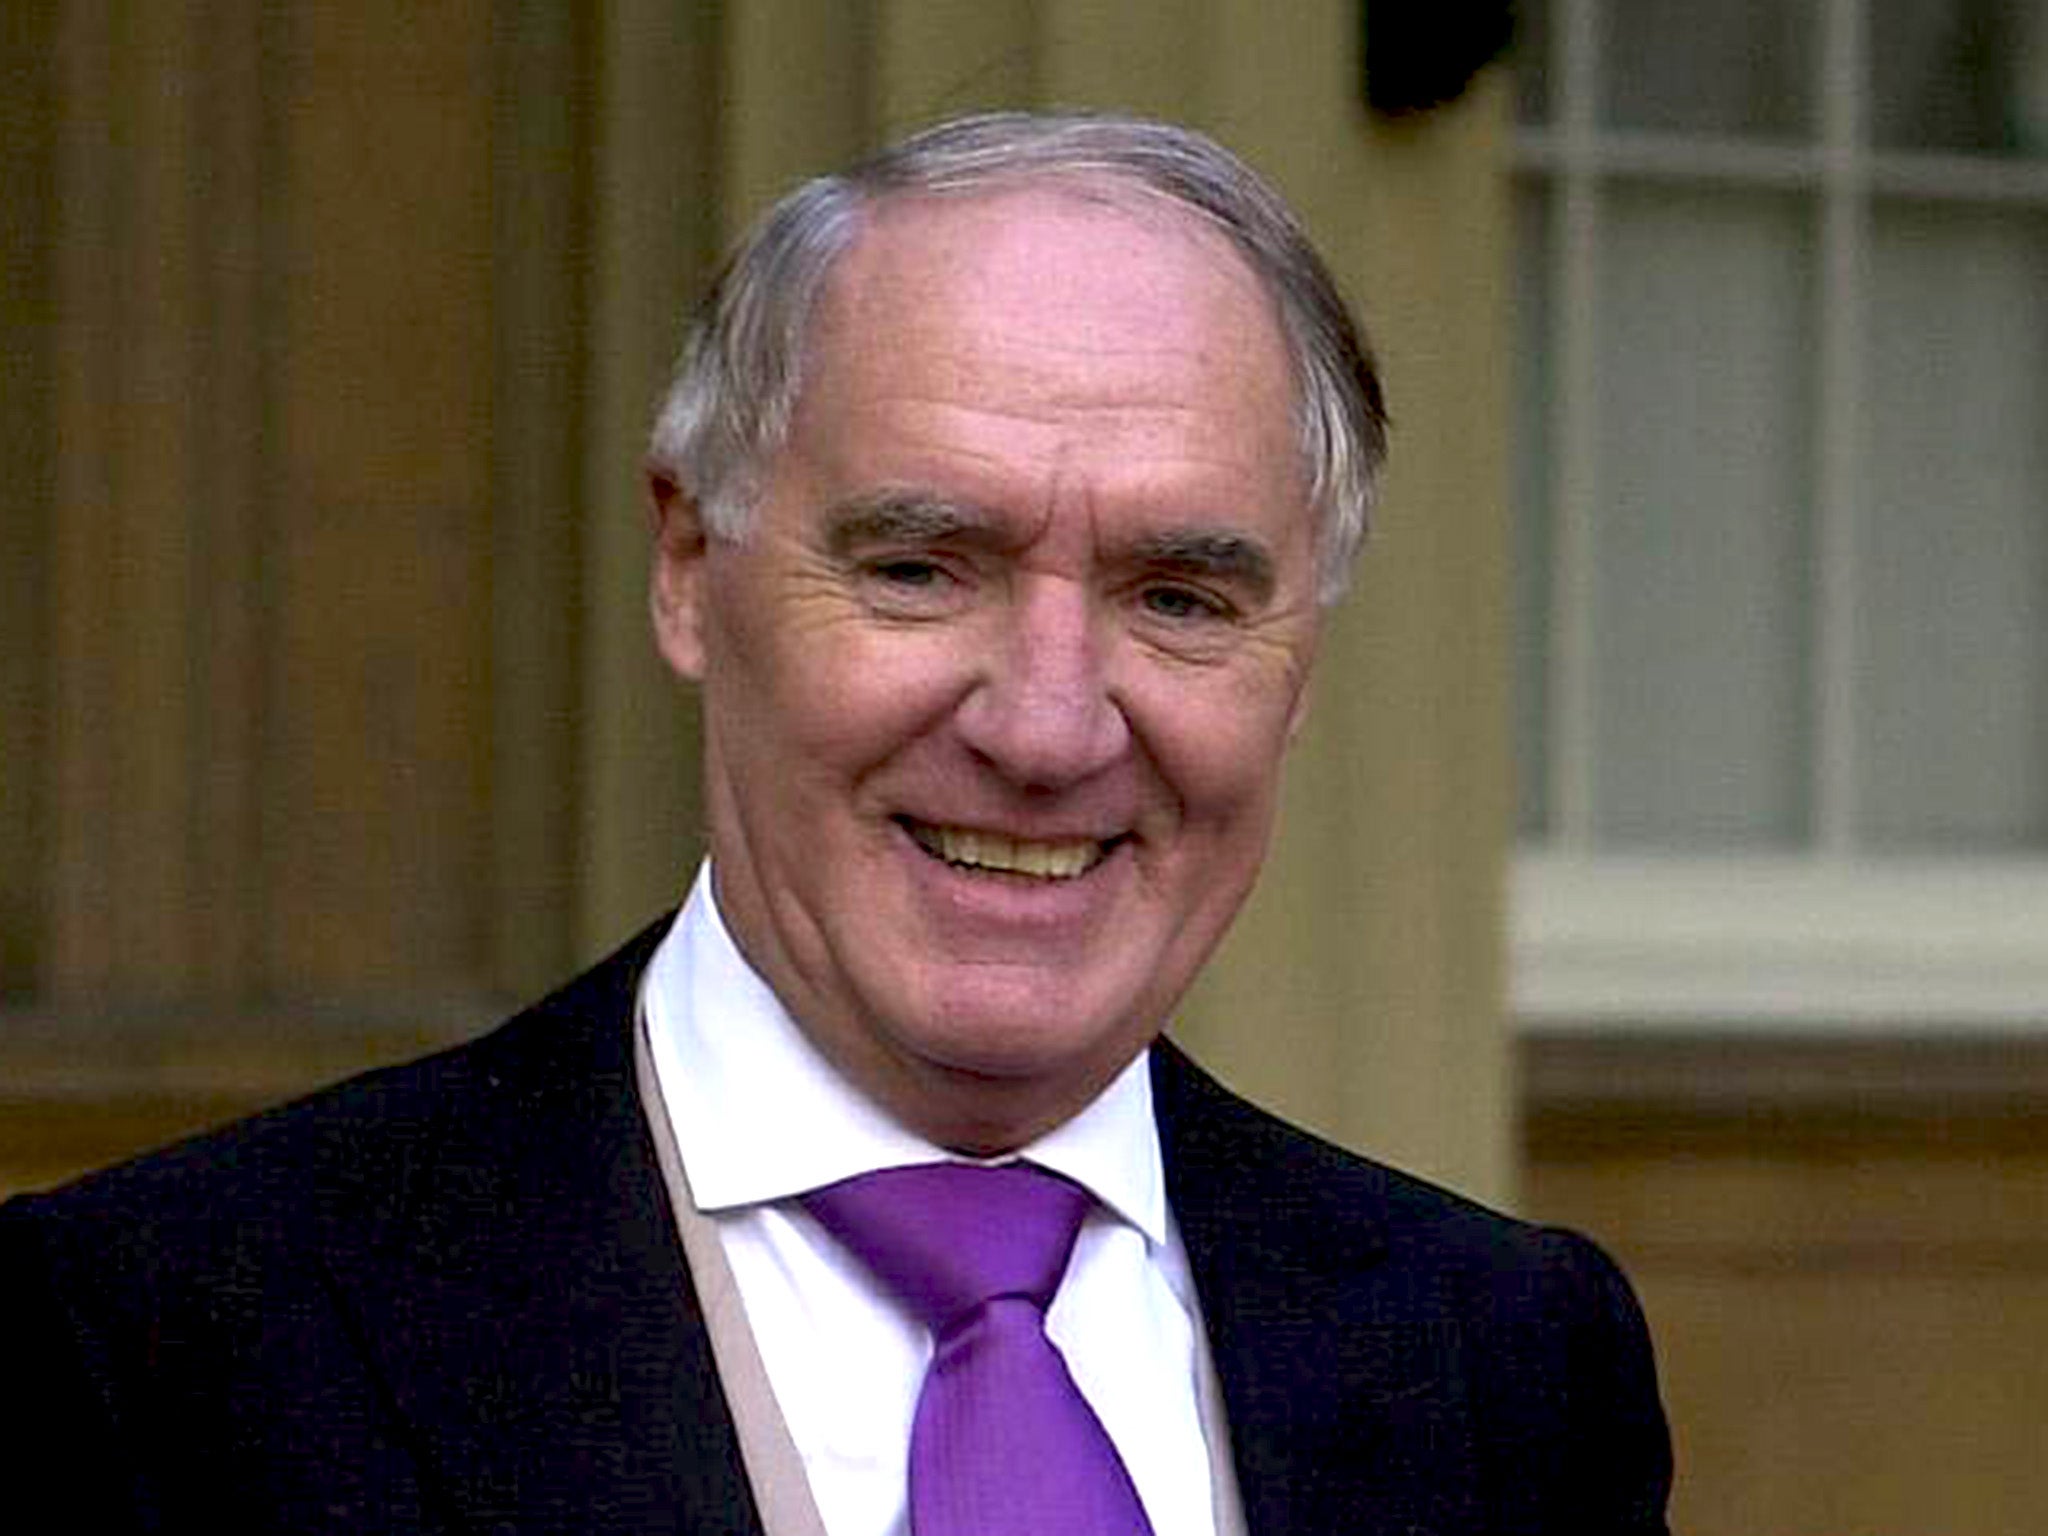 After receiving his knighthood at Buckingham Palace in 2000